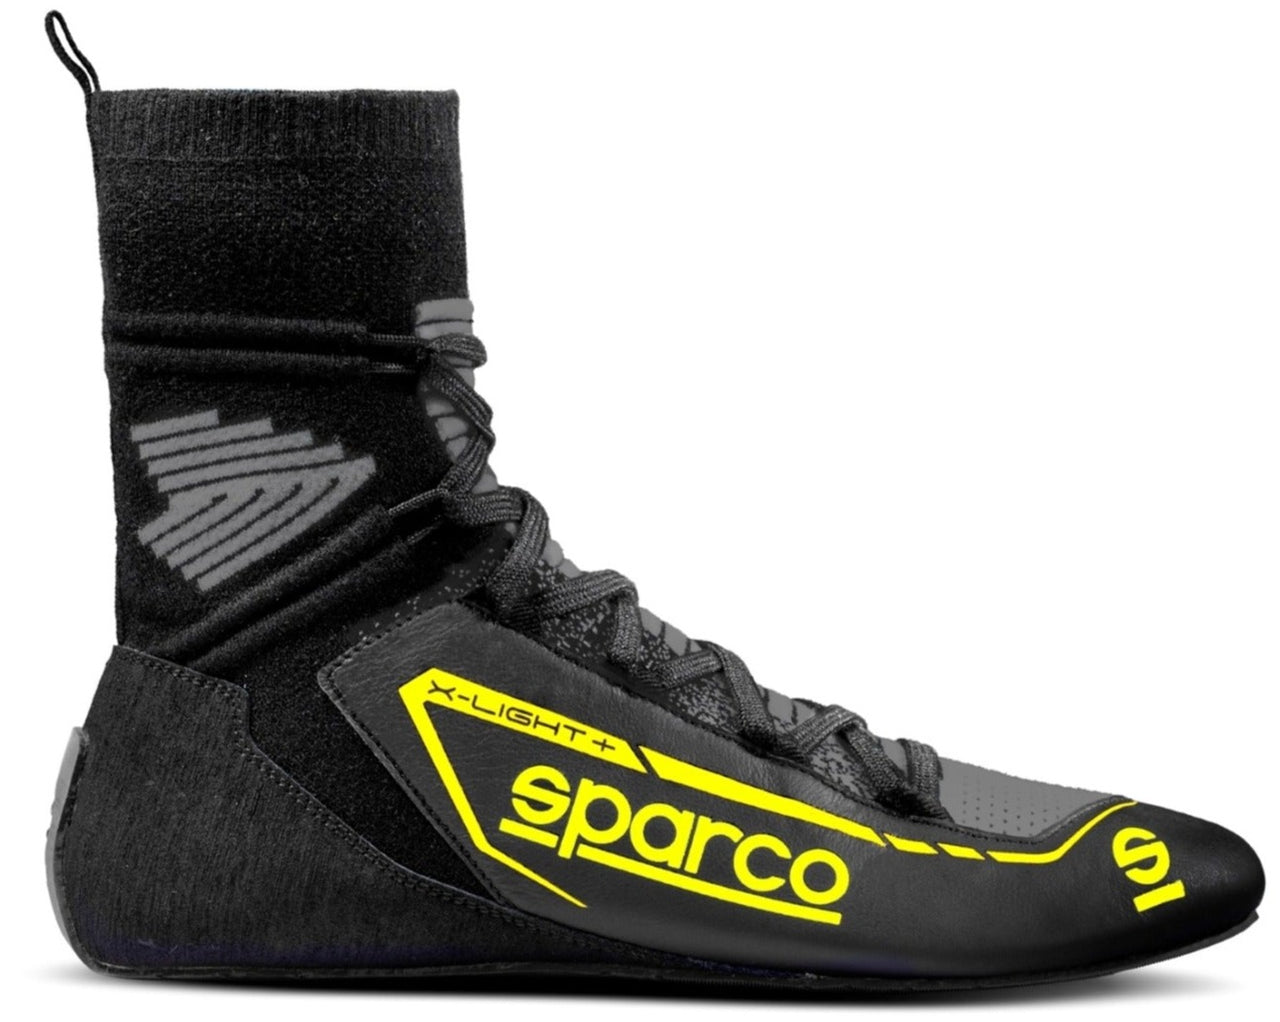 Sparco X-Light+ Racing Shoes Black / Yellow Image